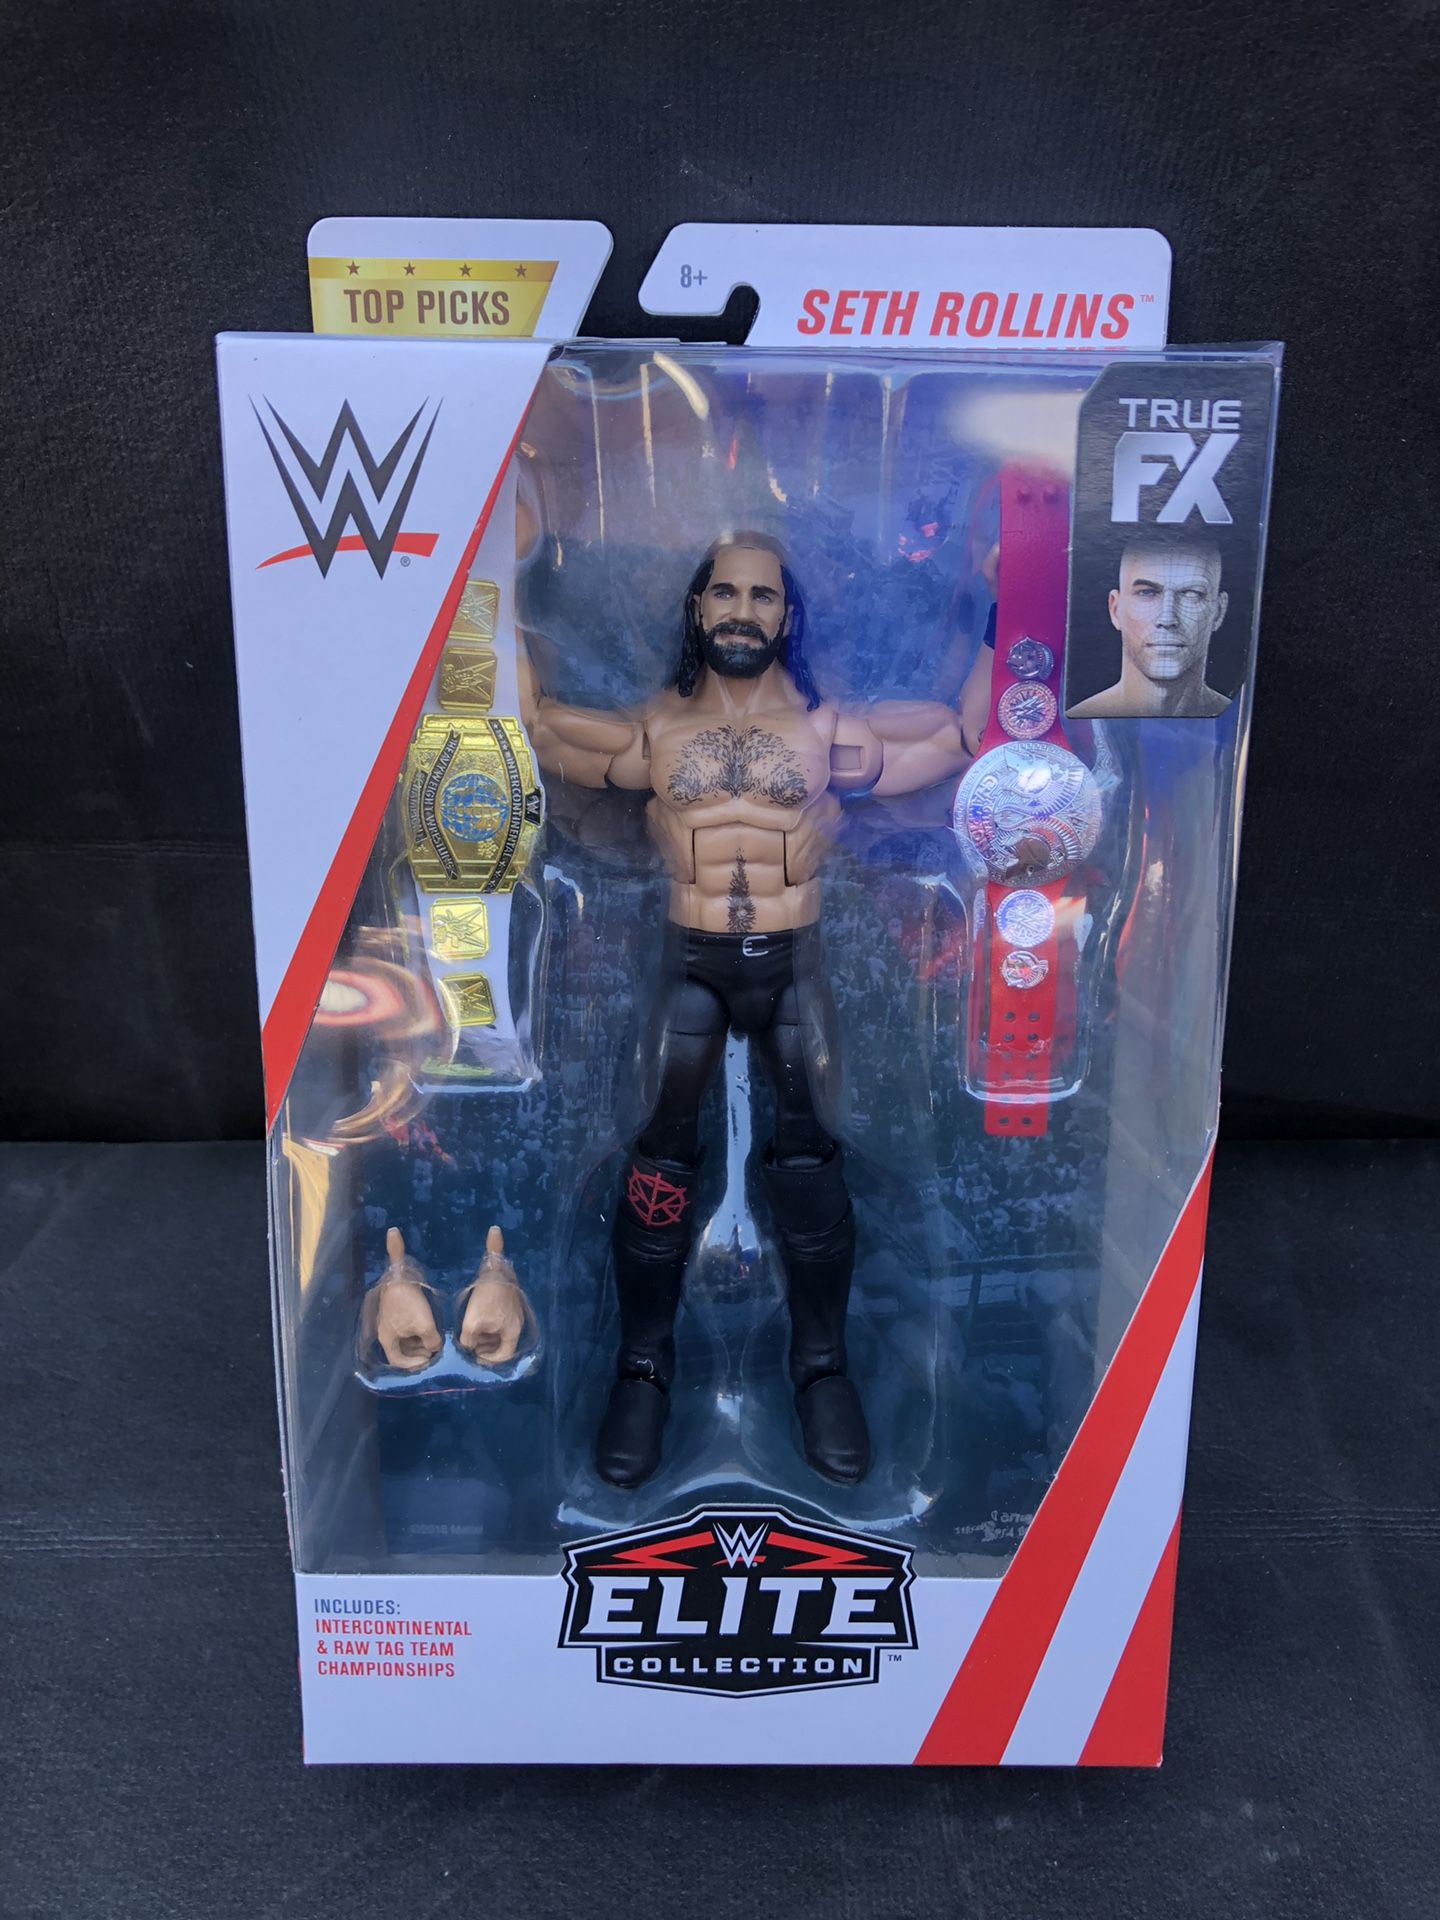 WWE elite collection action figure Seth Rollins